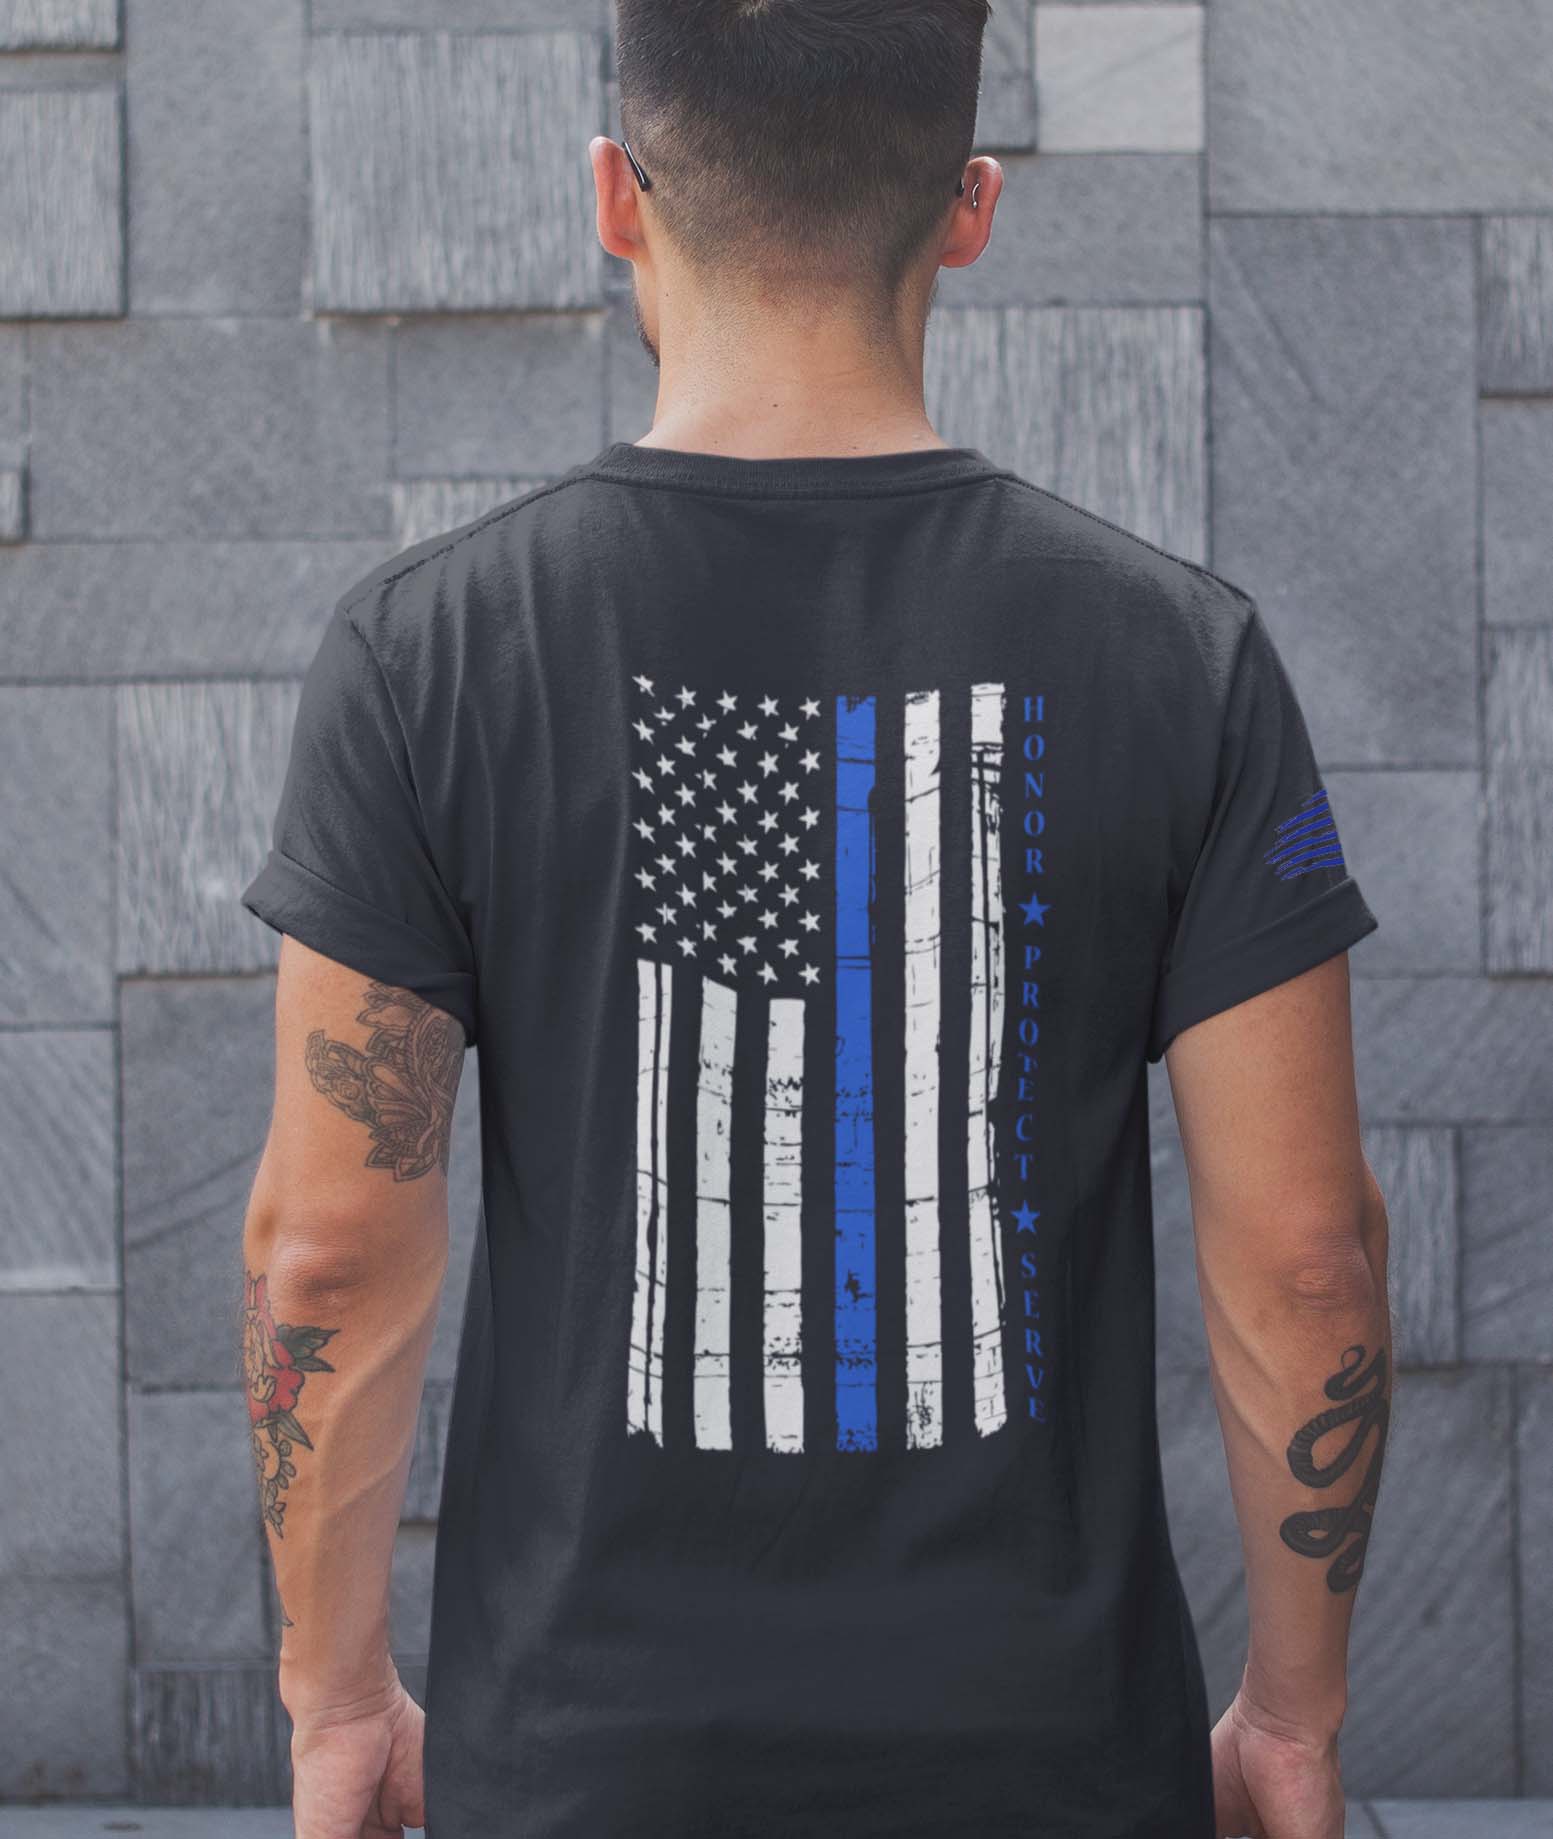 Thin Line - Honor Protect Serve T-Shirt IMS Alliance